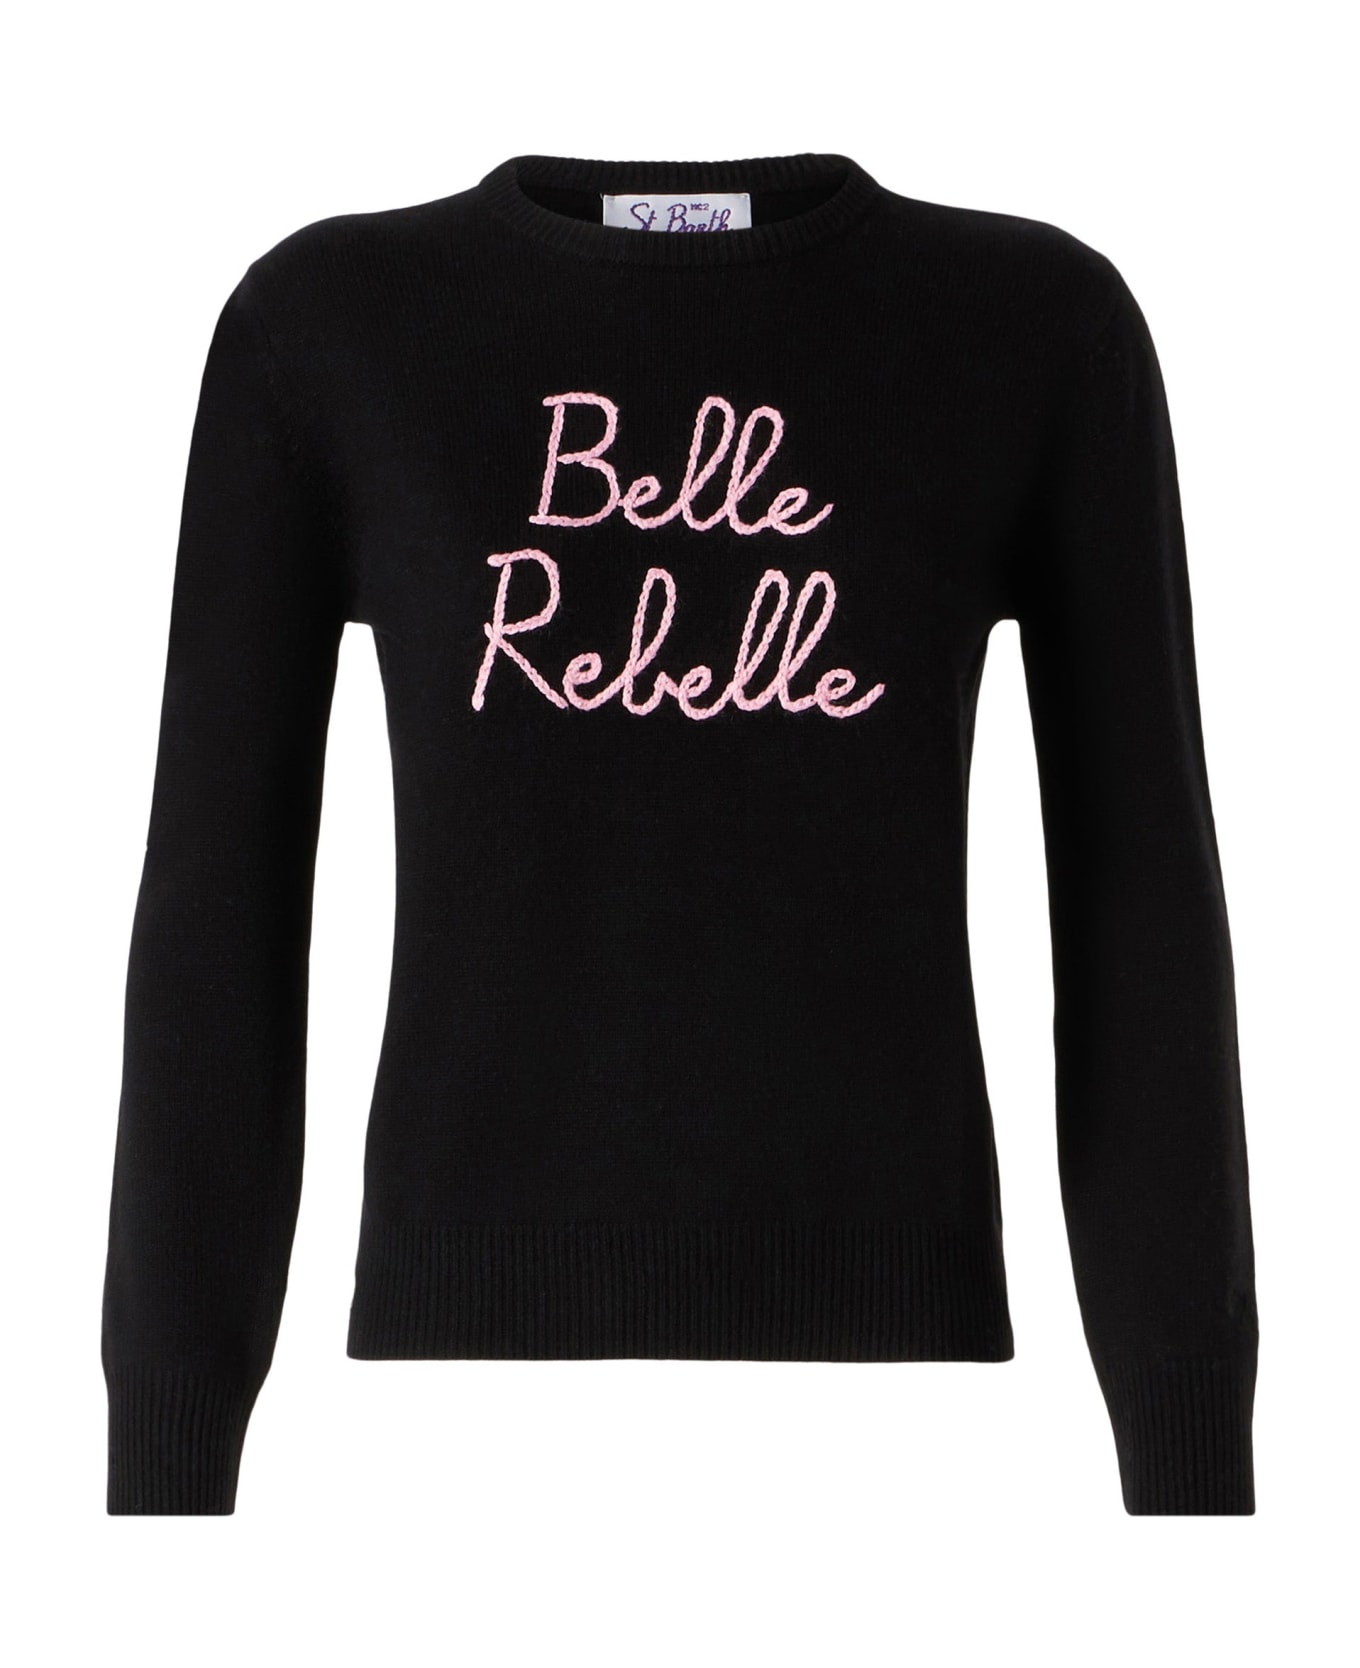 MC2 Saint Barth Woman Sweater With Belle Rebelle Embroidery - BLACK ニットウェア